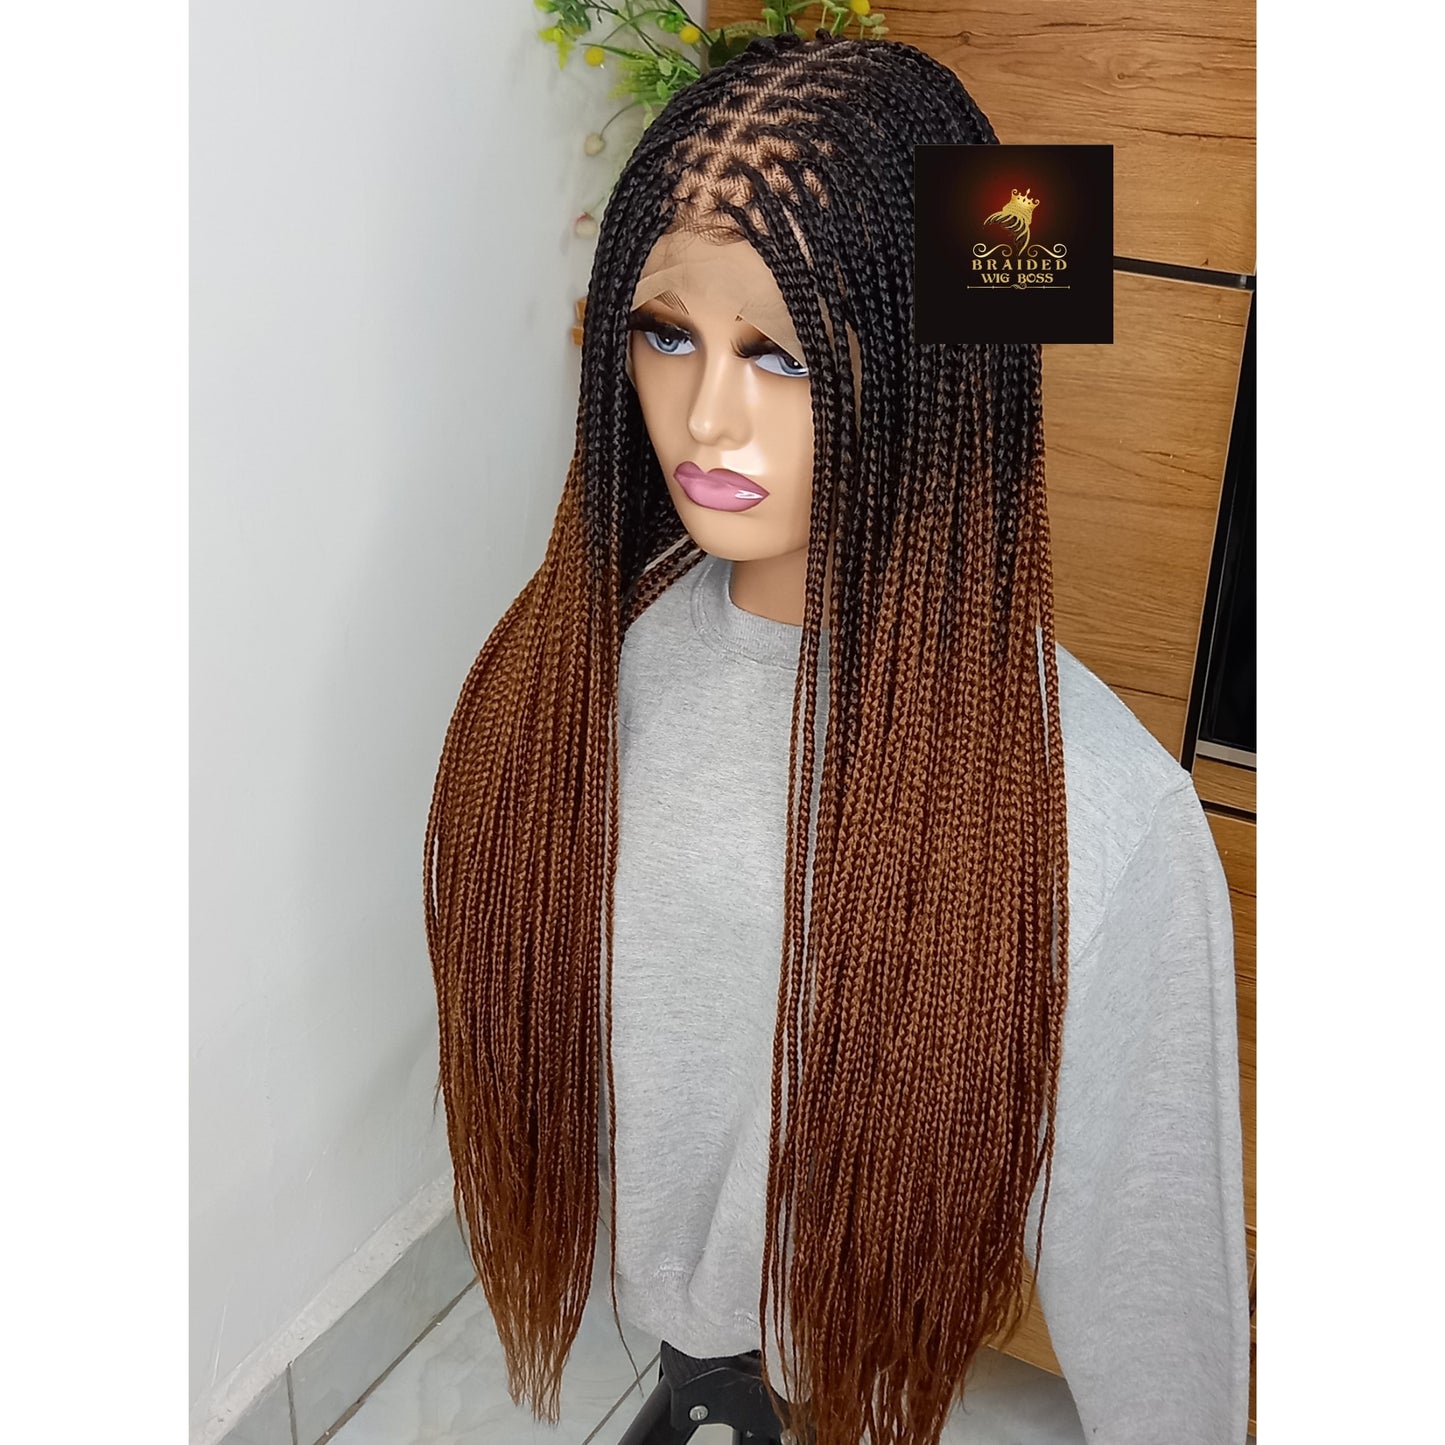 Upgrade Your Look with Our Ombre Knotless Braid Wig on Full Lace: Free Worldwide Shipping